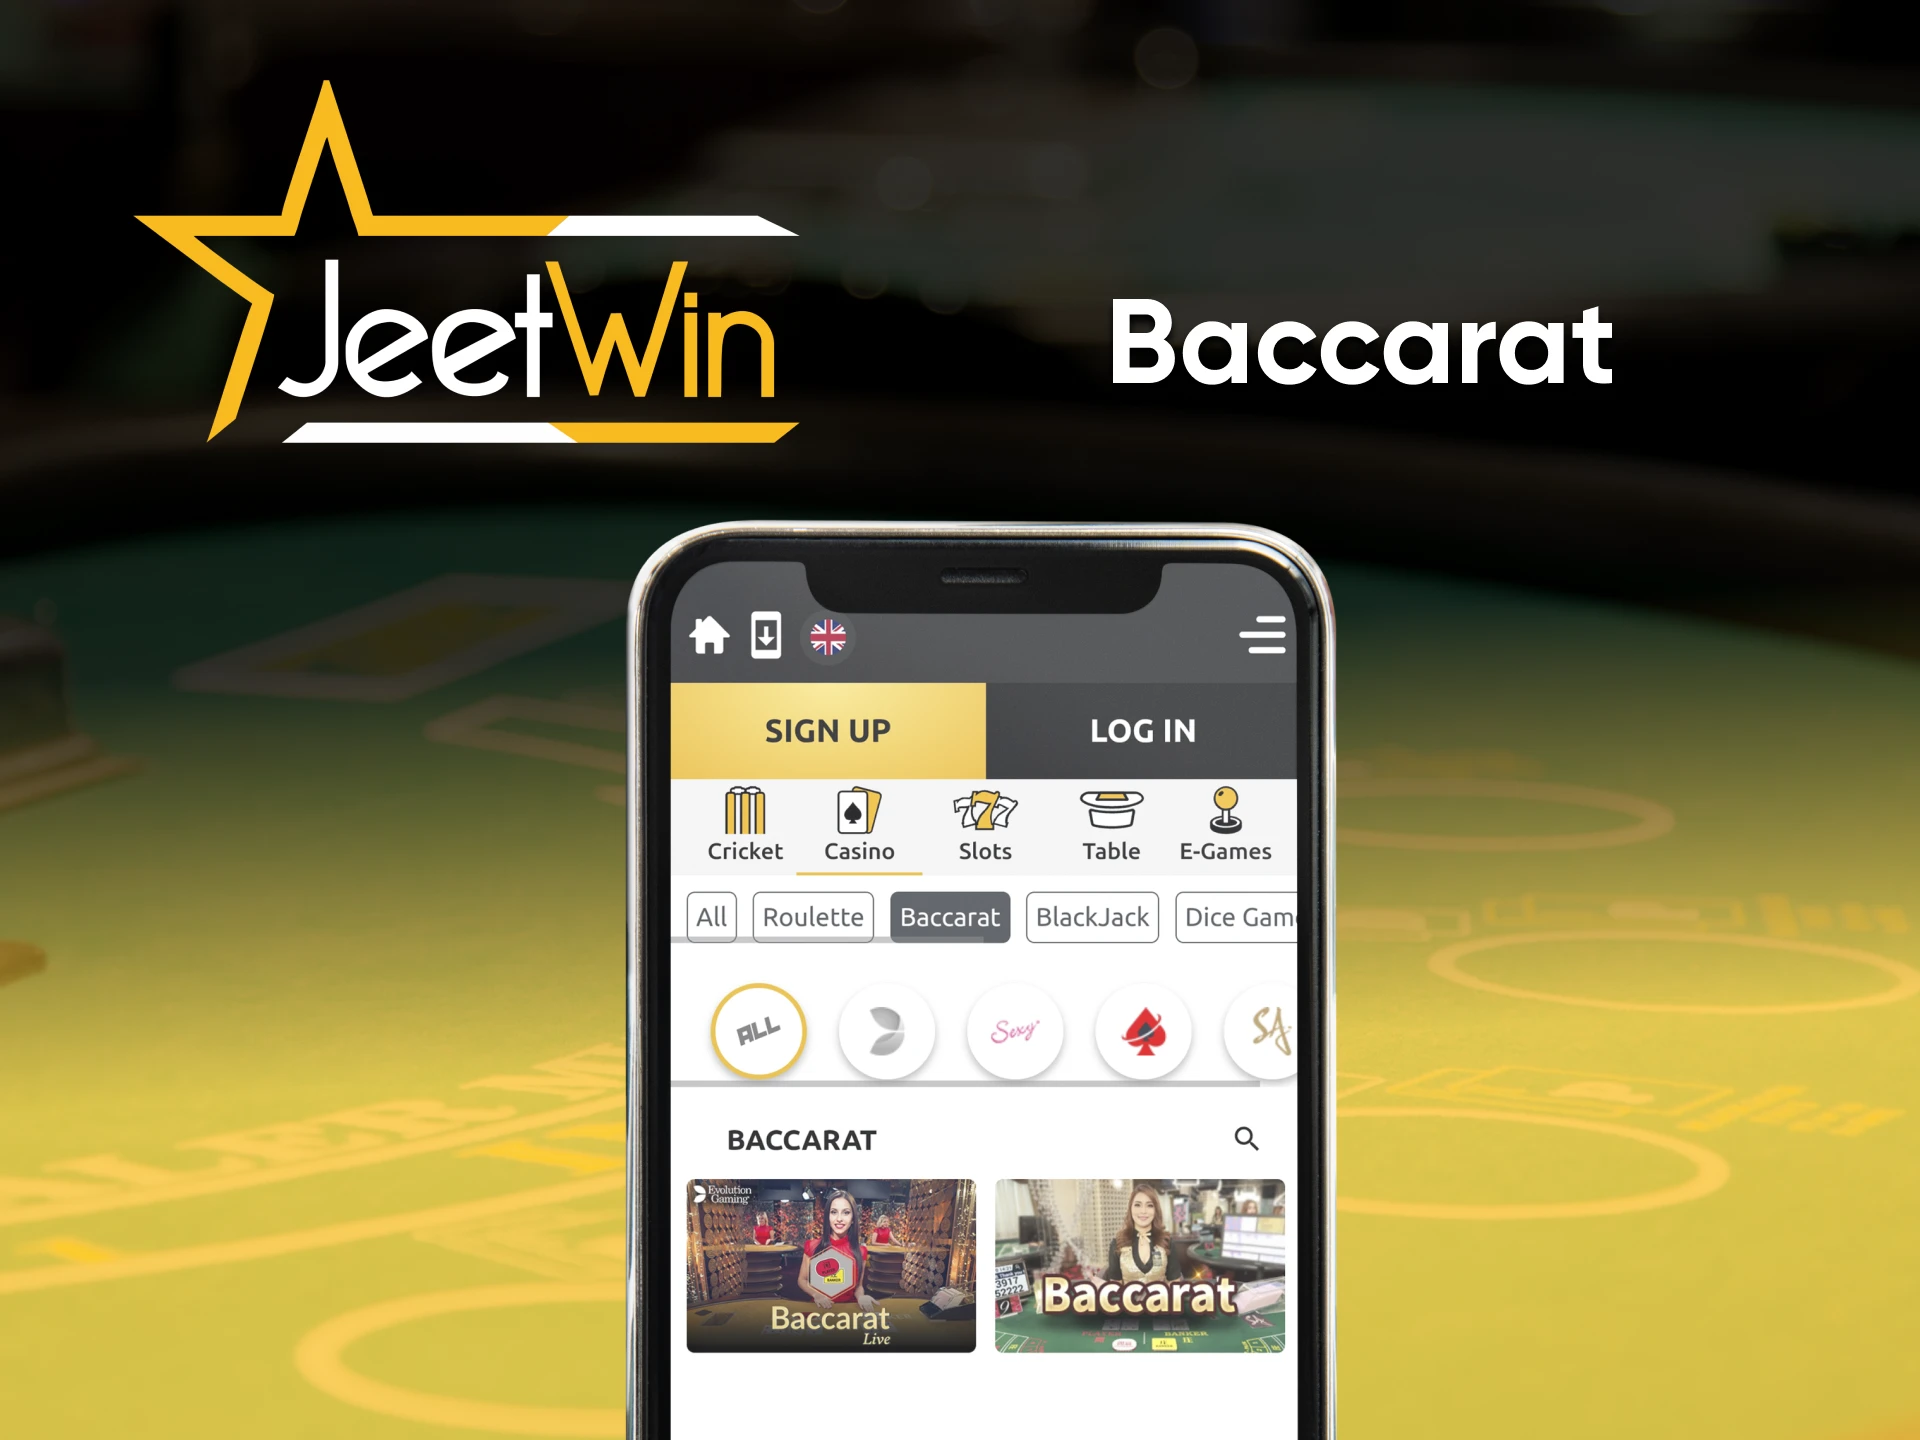 Baccarat is a game that you can play on Jeetwin.